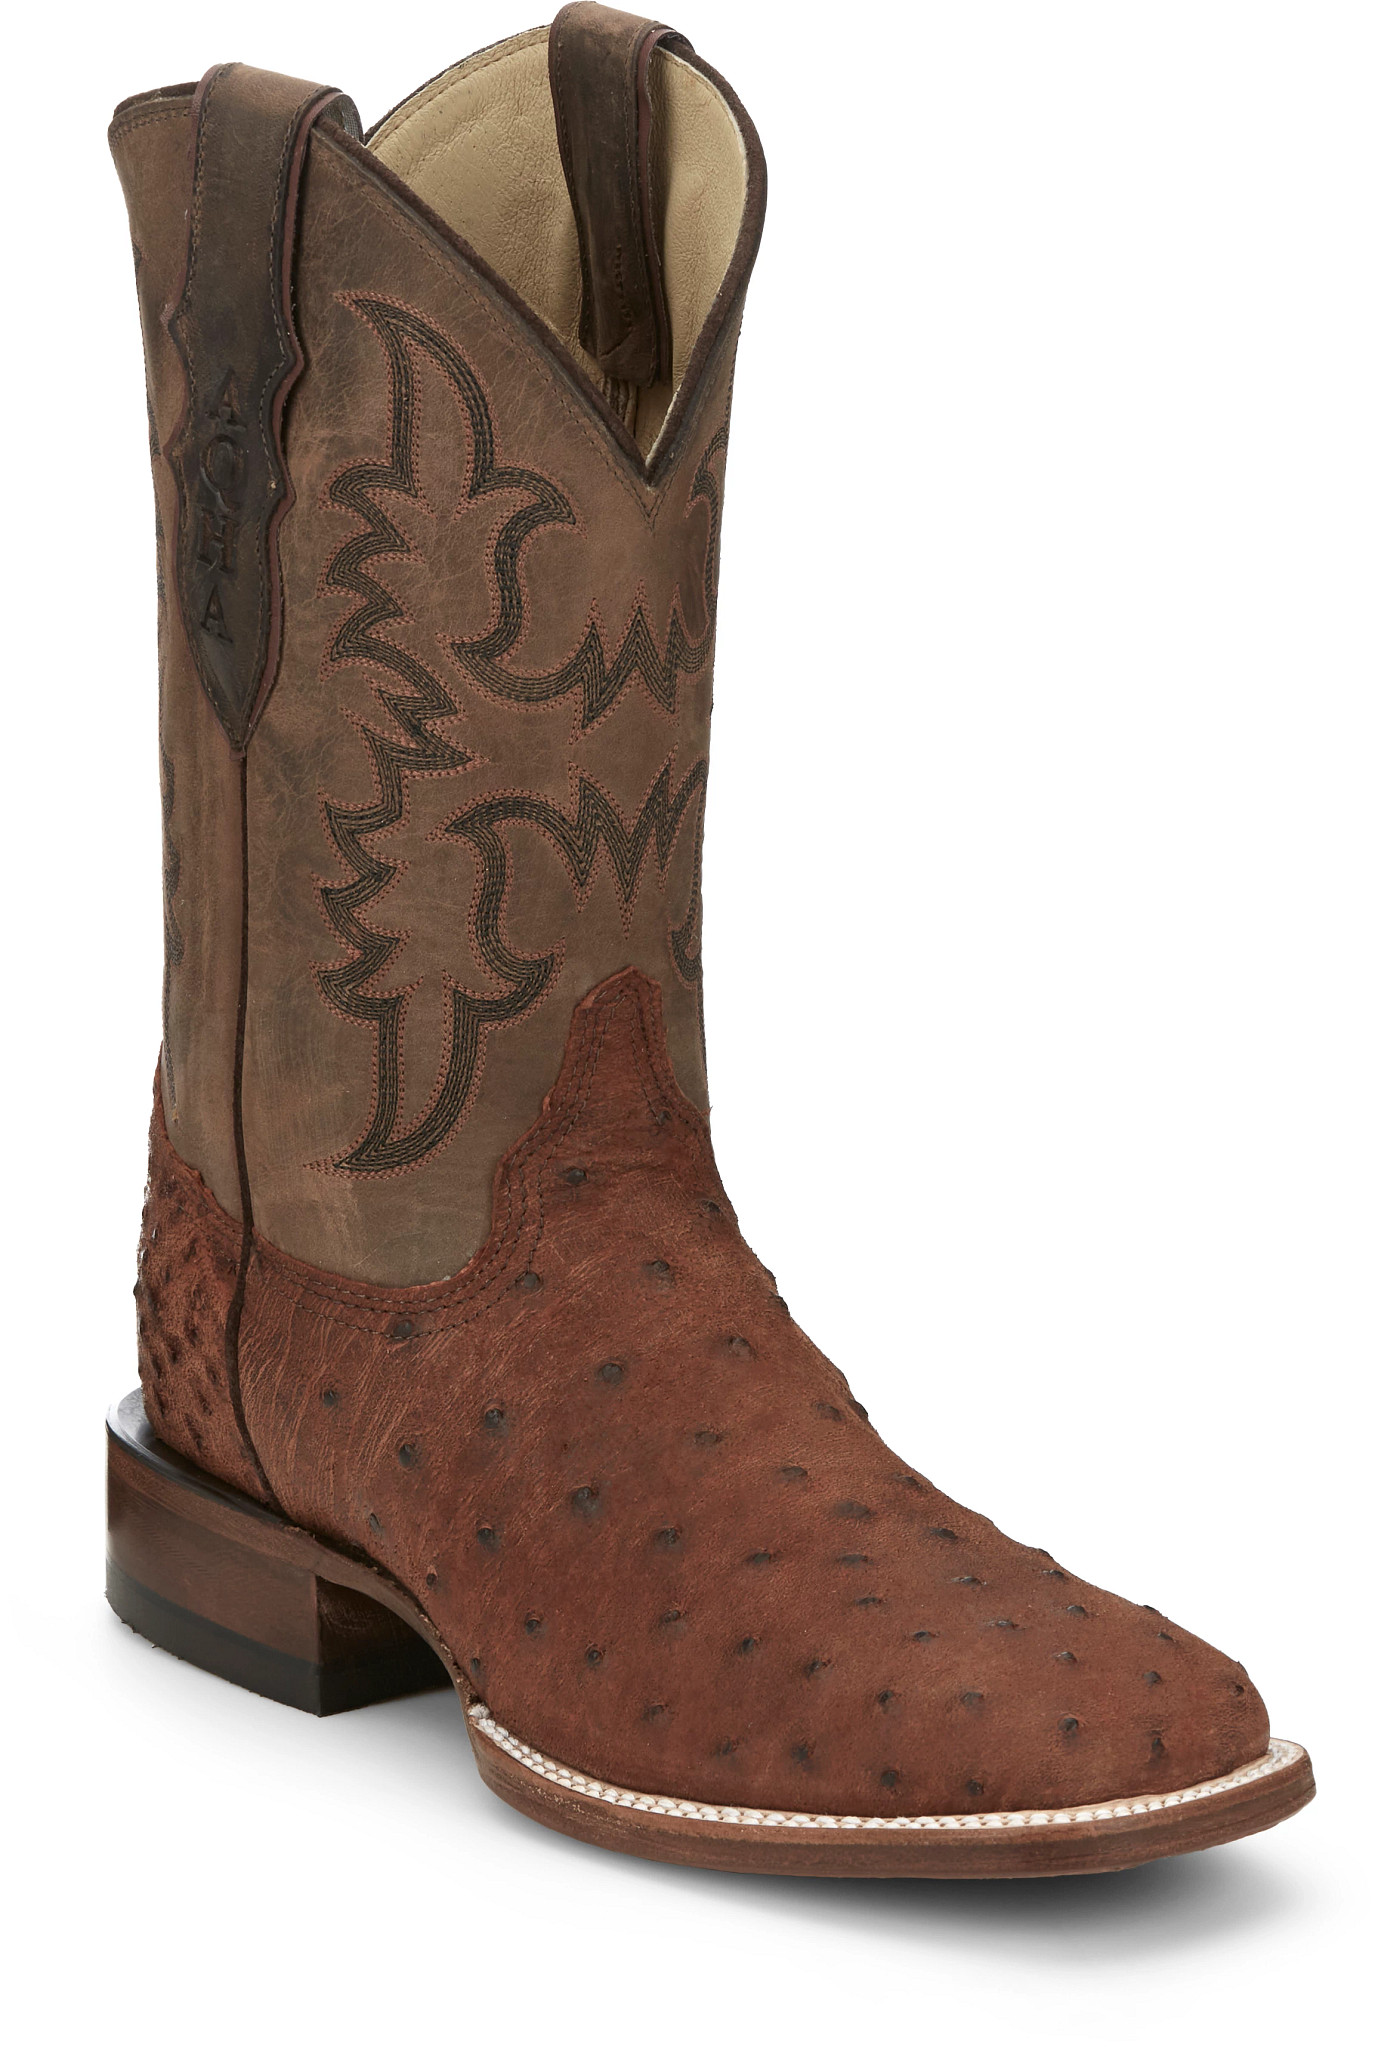 Buy Men's Boots Collection | Justin Boots